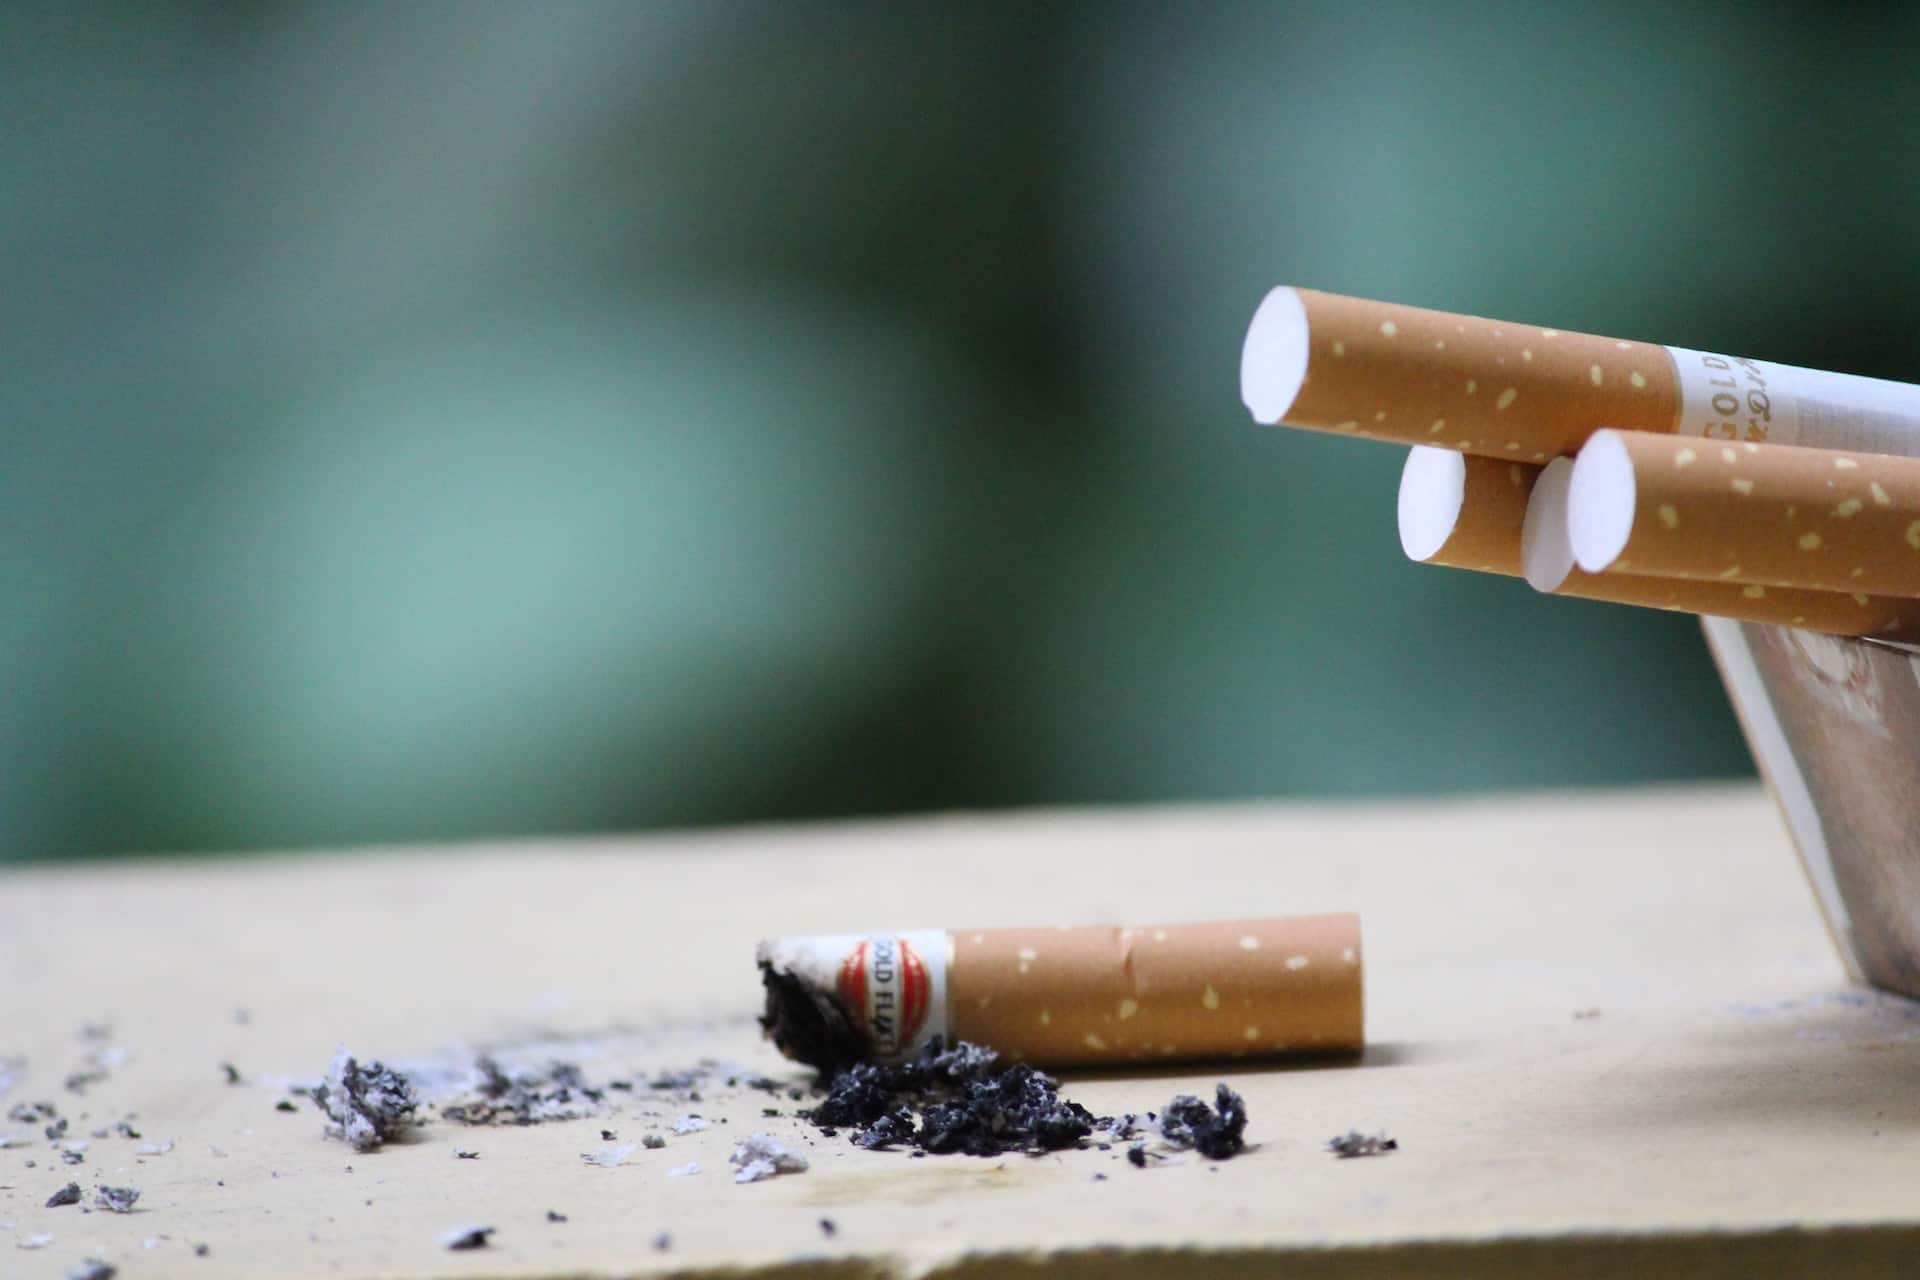 How Does Tobacco use Affect Life Insurance Rates?